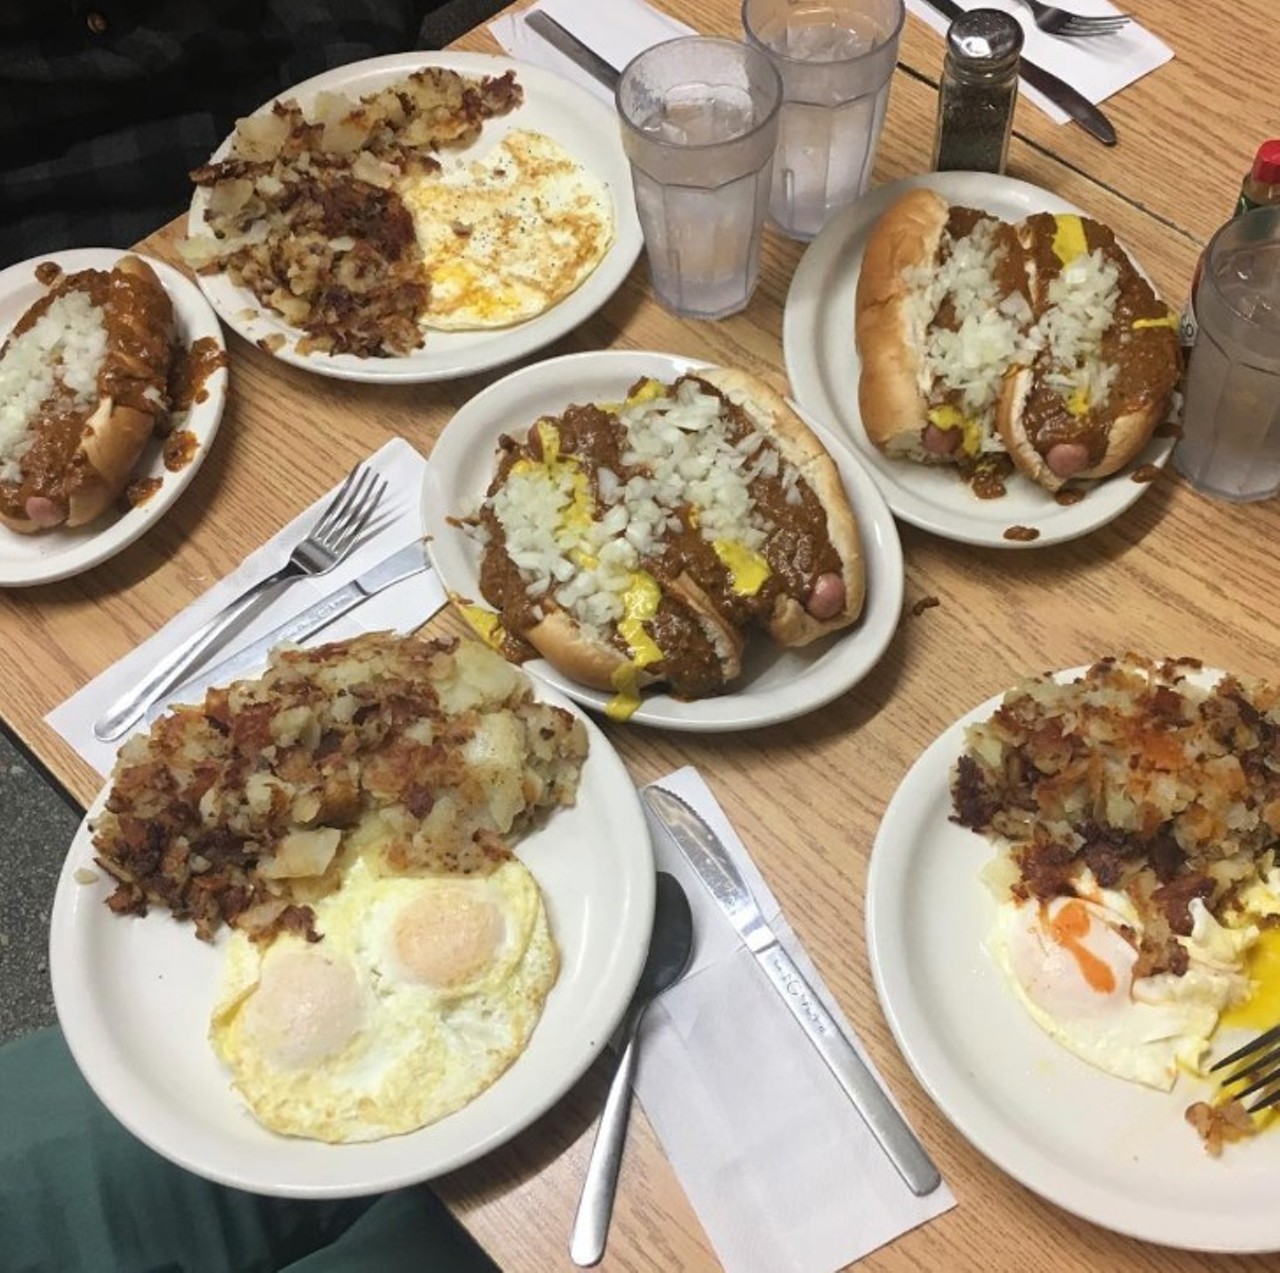 Duly&#146;s Place
5458 W Vernor Hwy, Detroit, MI 48209
Once visited by the late Anthony Bourdain, Duly&#146;s Place is arguably the best place to get a coney dog in Detroit. 
Photo with permission from @togetherpangea